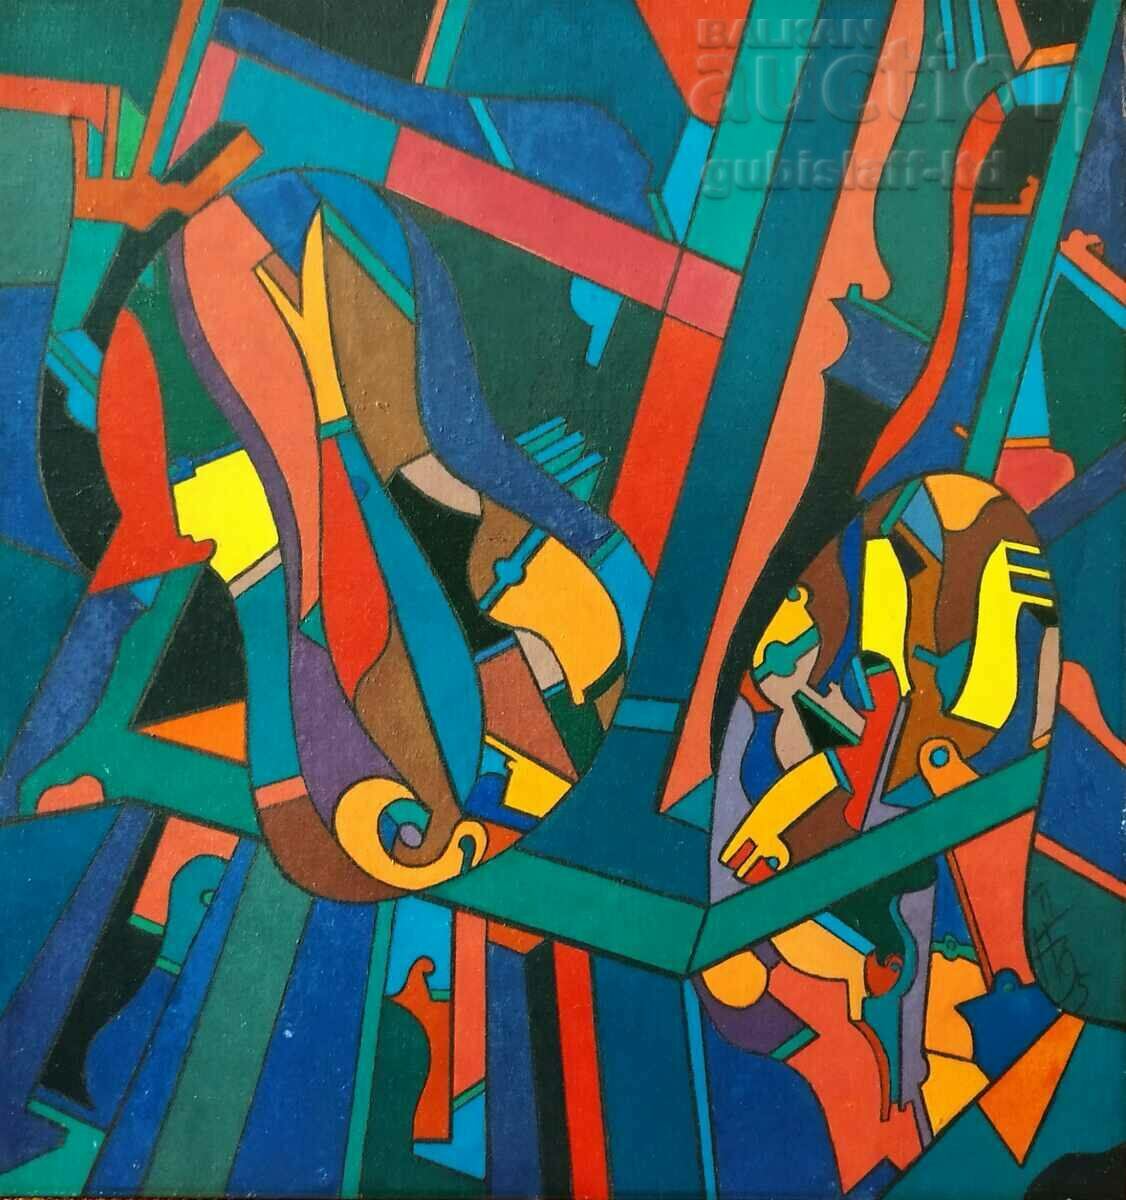 Painting, abstraction, cubism, art. Bogdan Benev, 1995